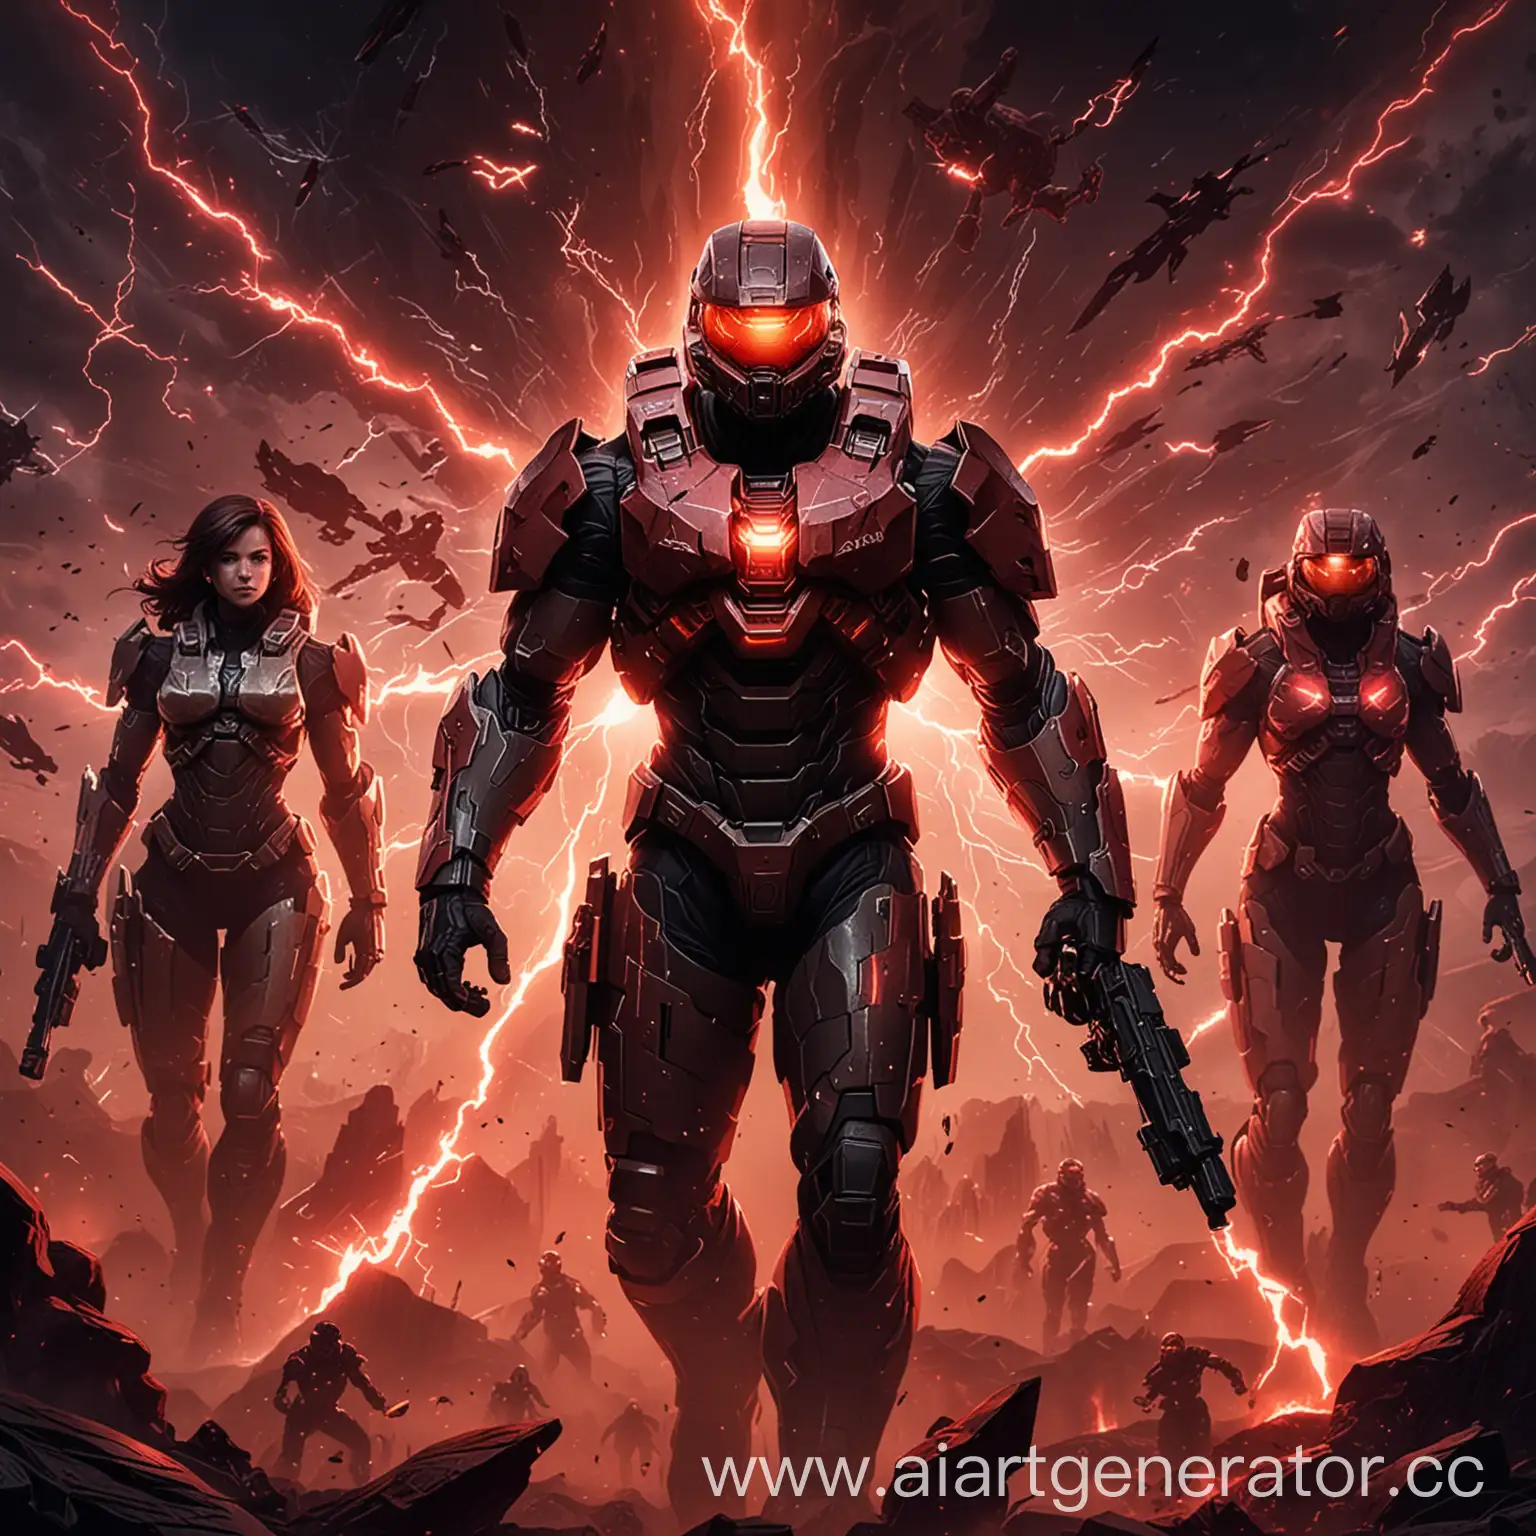 Halo-Infinity-Characters-in-Red-and-Black-with-Lightning-Effect-and-Shadow-Inscription